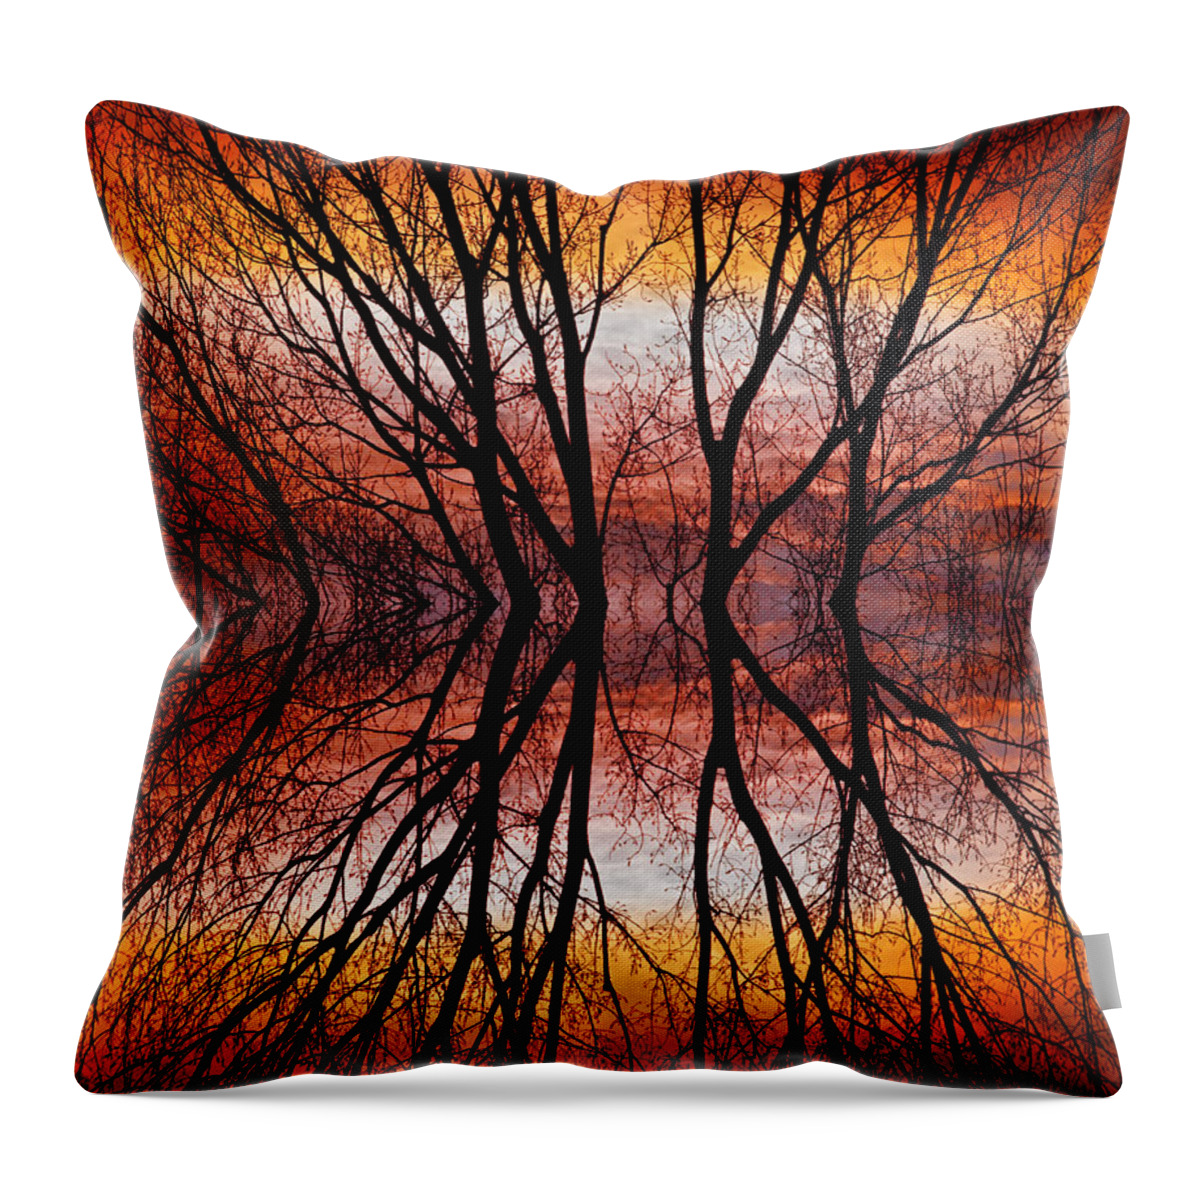 Abstracts Throw Pillow featuring the photograph Sunset Tree Silhouette Abstract 2 by James BO Insogna